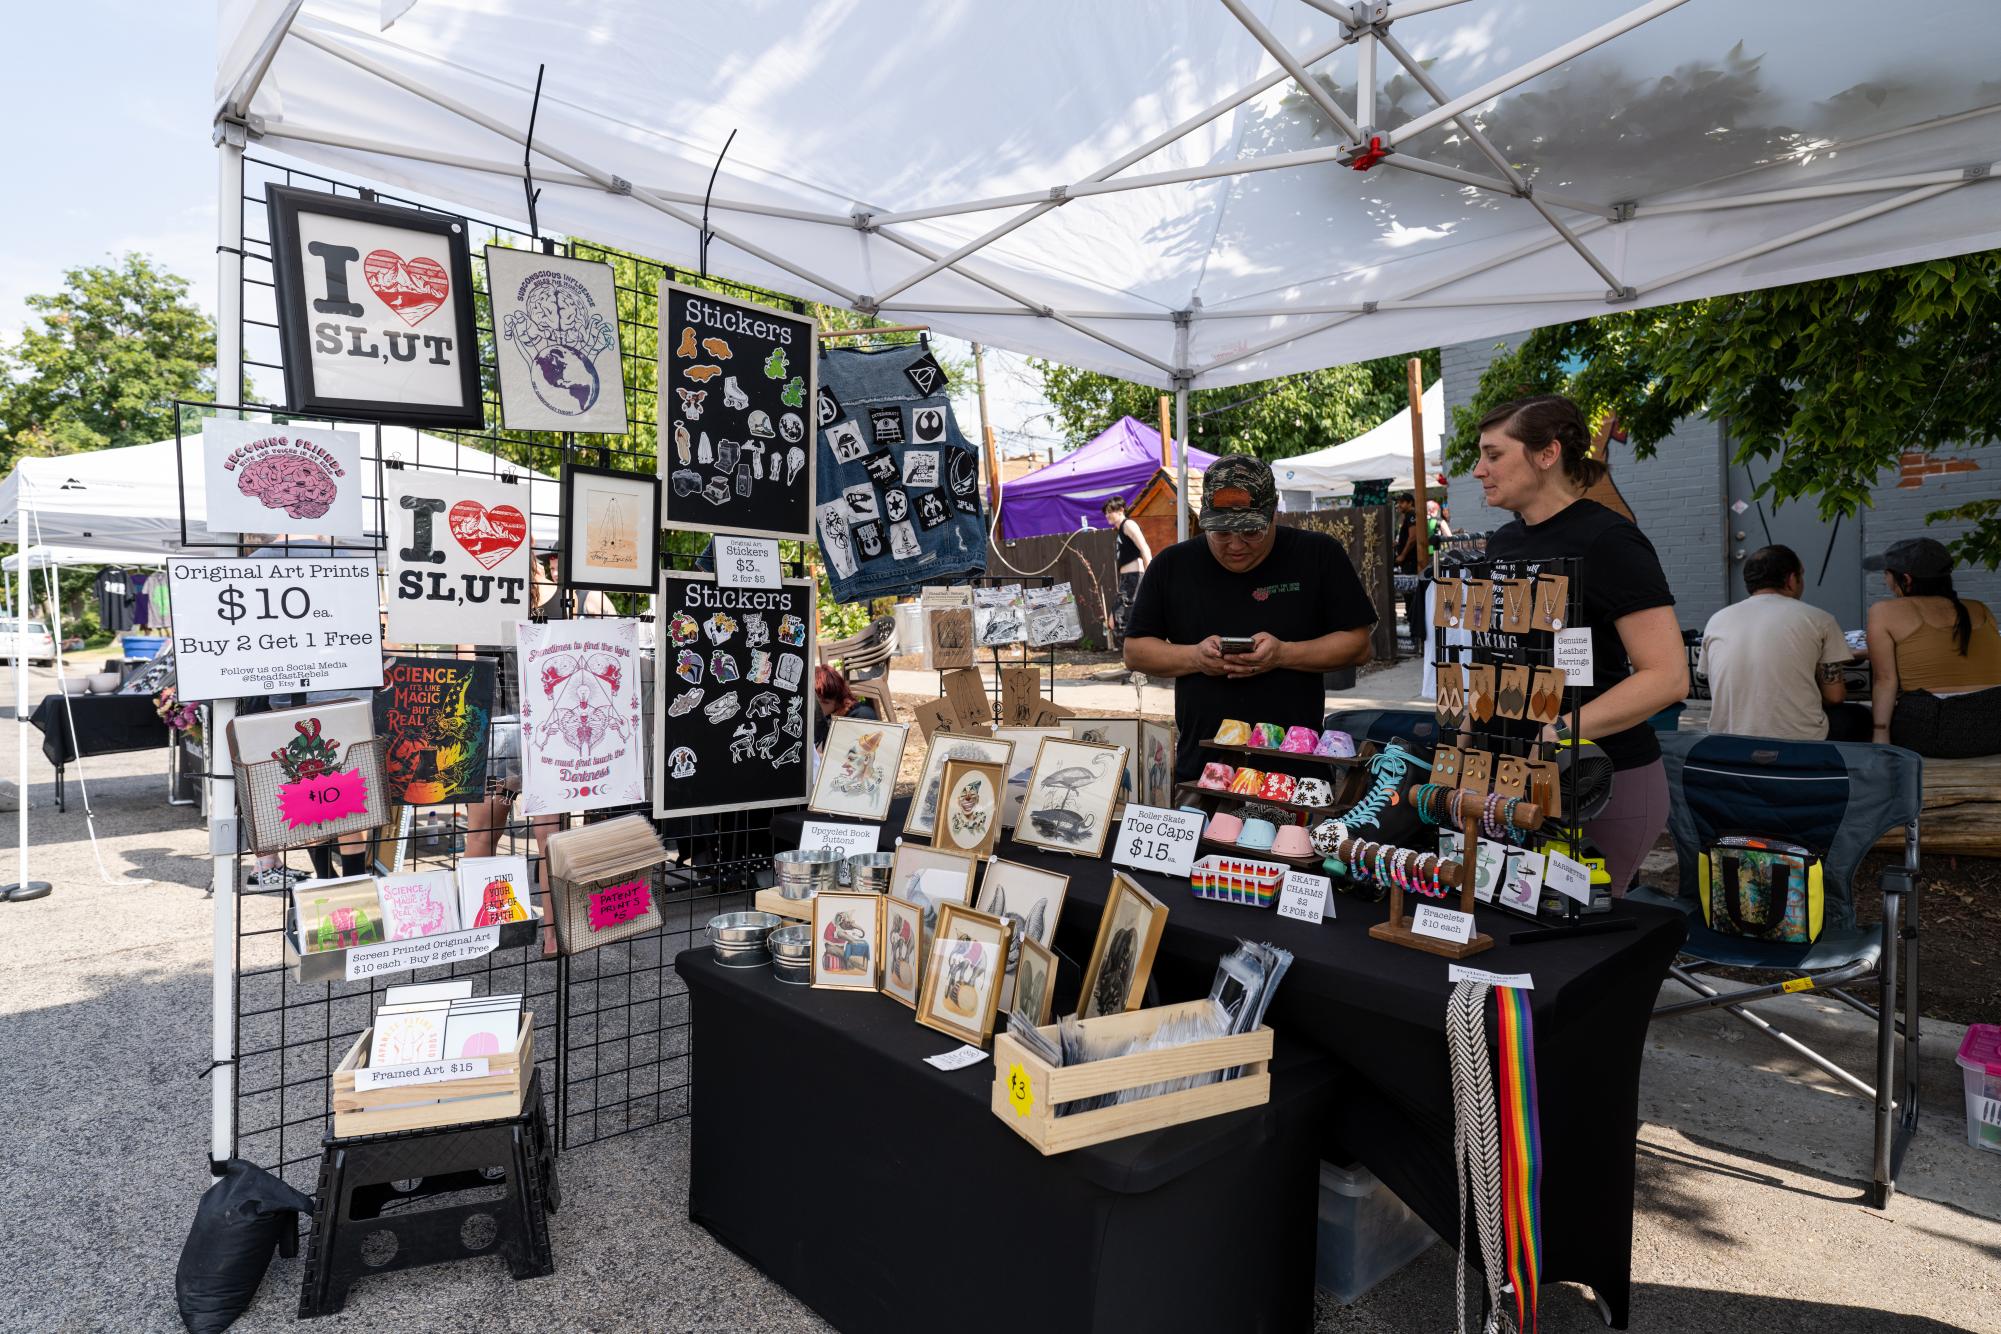 Kristi Sahagun and Derek Sahagun in their booth at the SLC Punk Rock Flea Market at the Lost Acorn Gallery in Salt Lake City on July 30, 2023. (Photo by Xiangyao "Axe" Tang | The Daily Utah Chronicle)